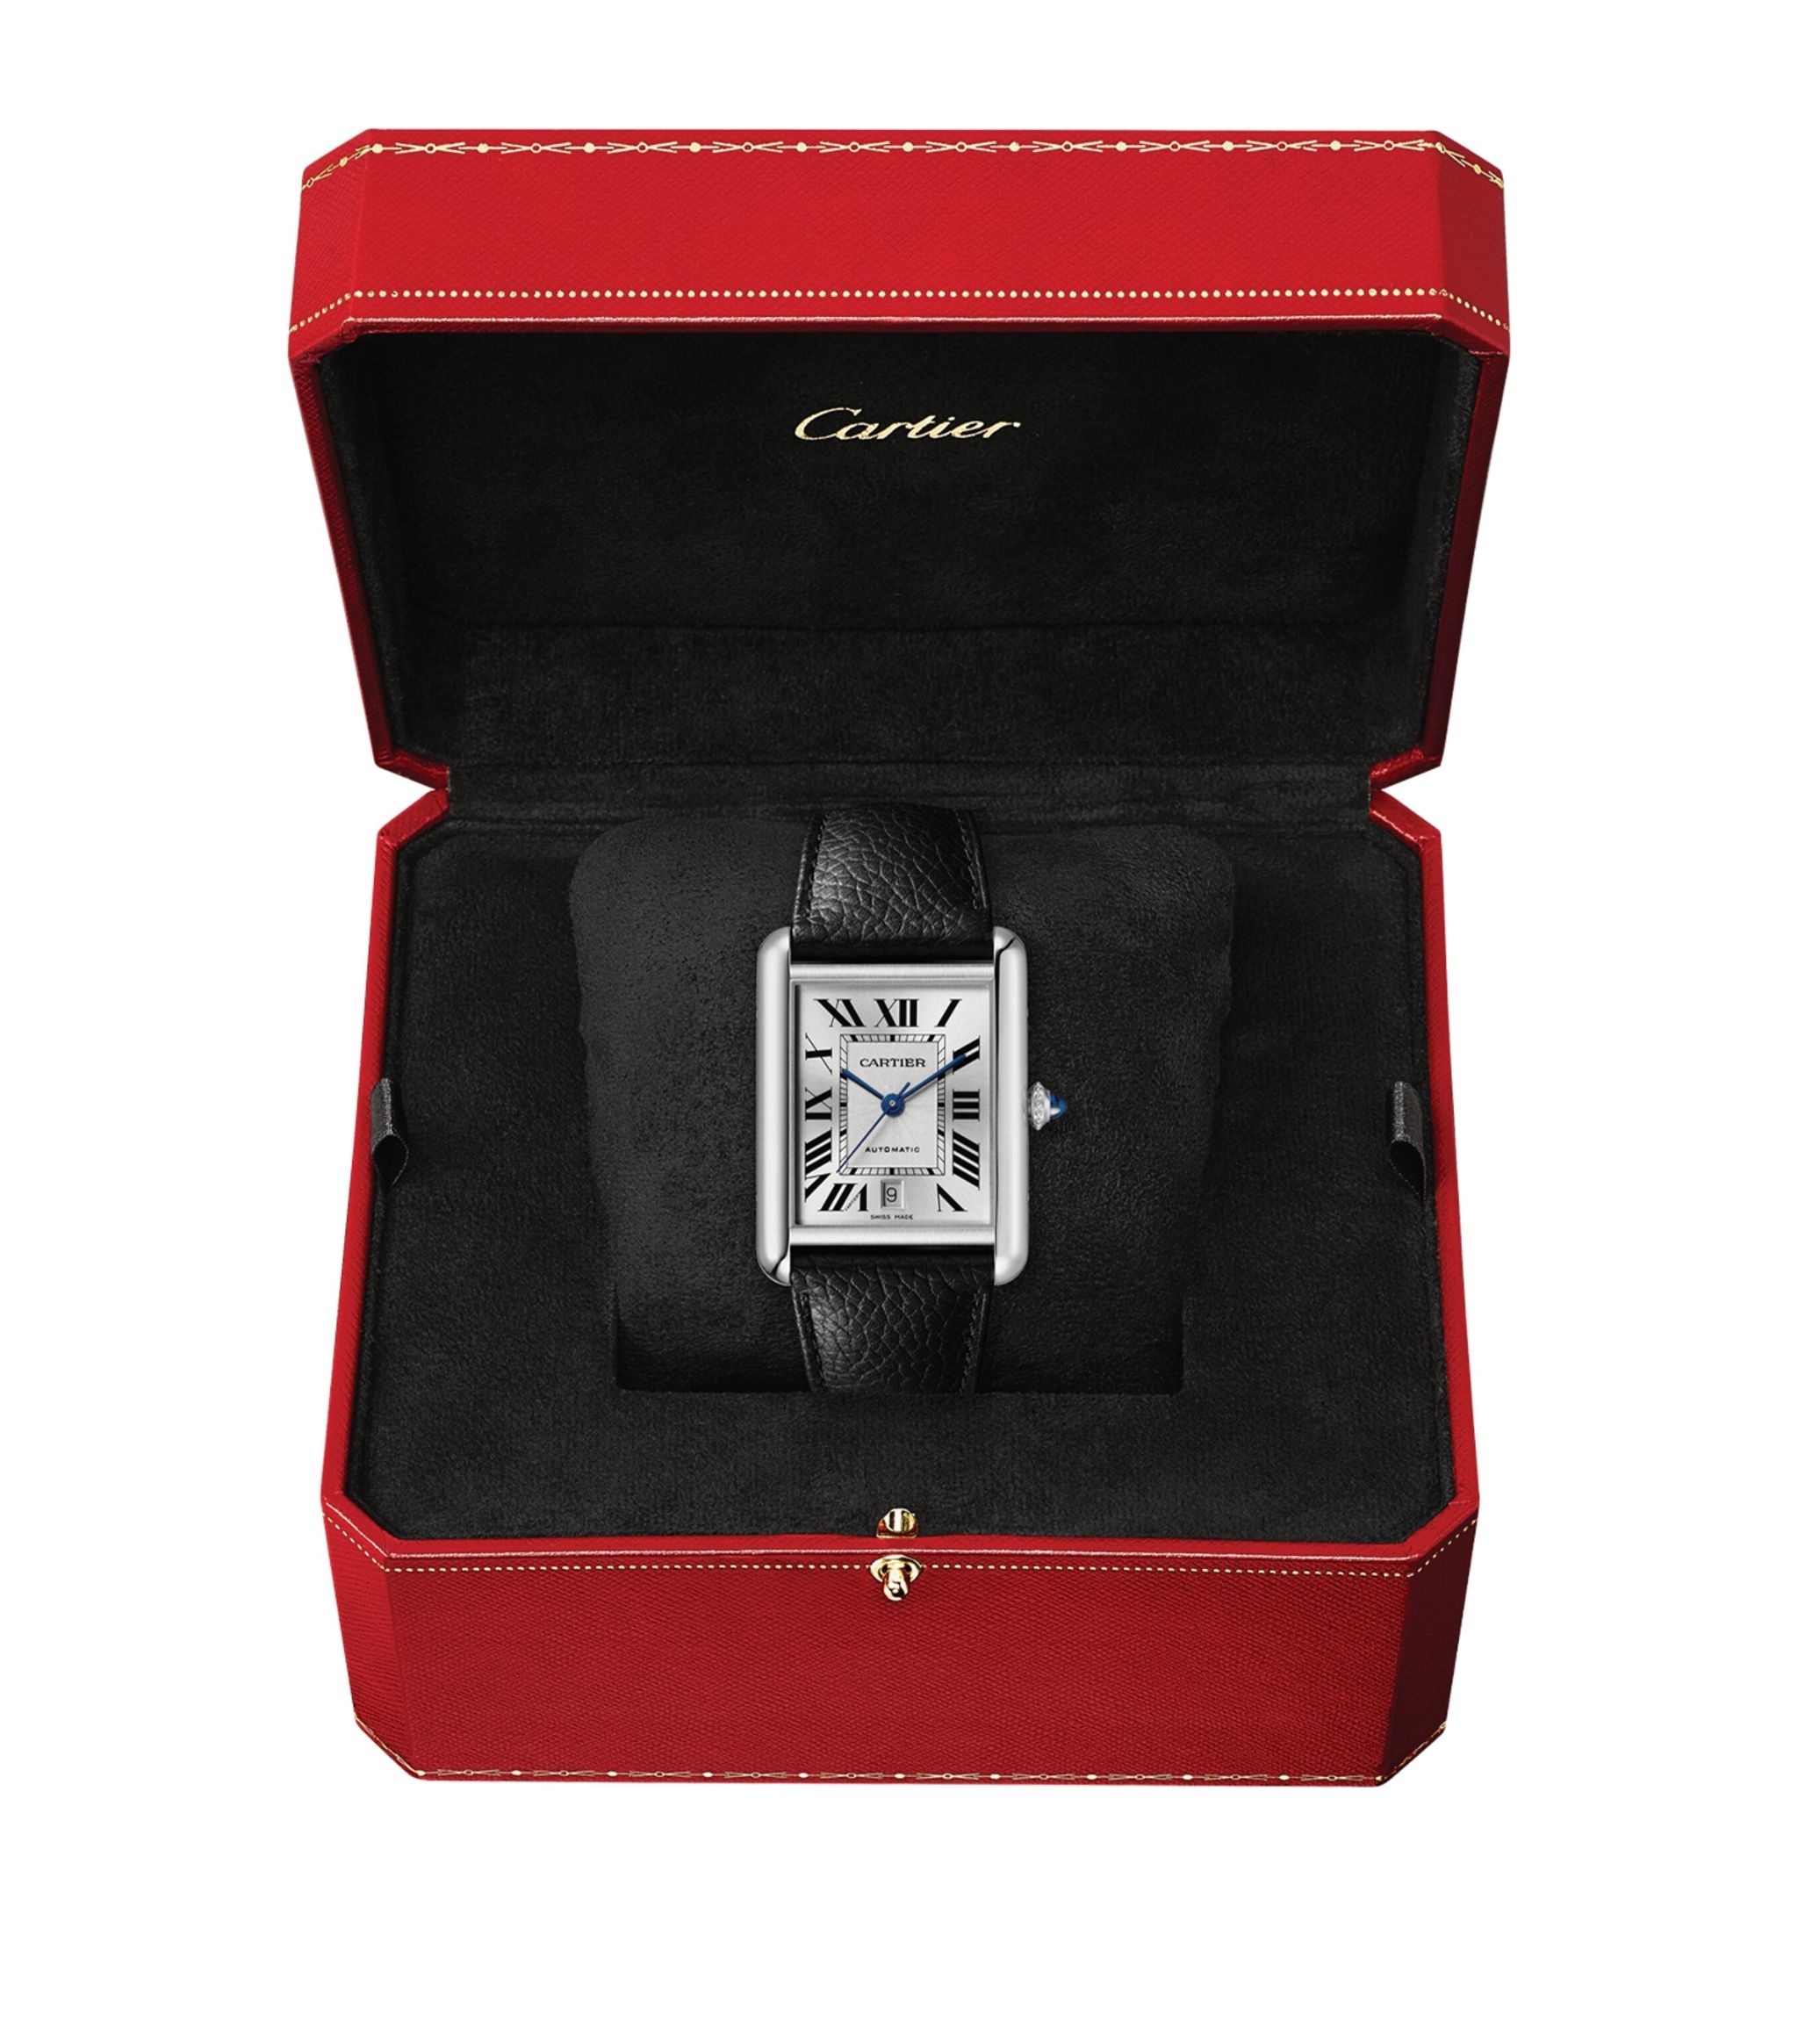 Đồng hồ CARTIER Stainless Steel and Diamond Tank Must Watch 22mm mặt số màu trắng